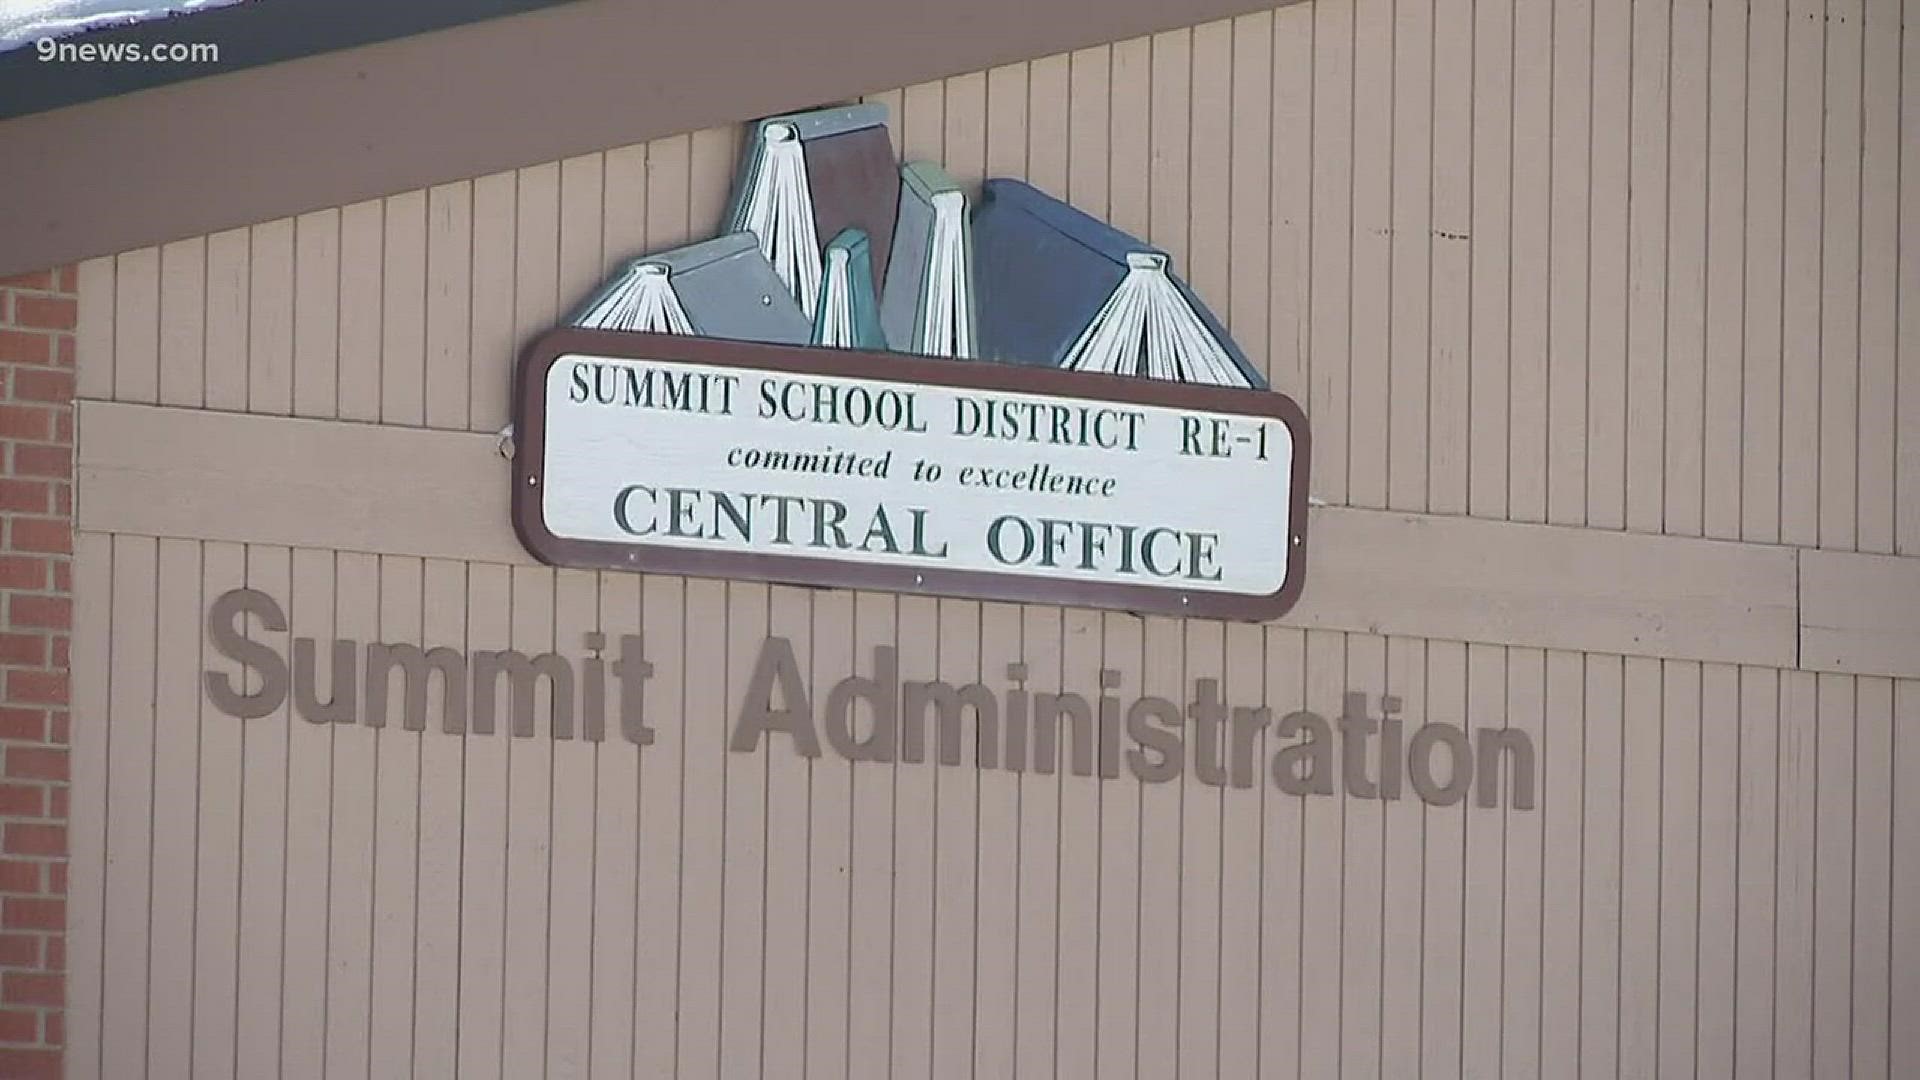 Flu cases are up in Summit County and the state reported a second child flu death.